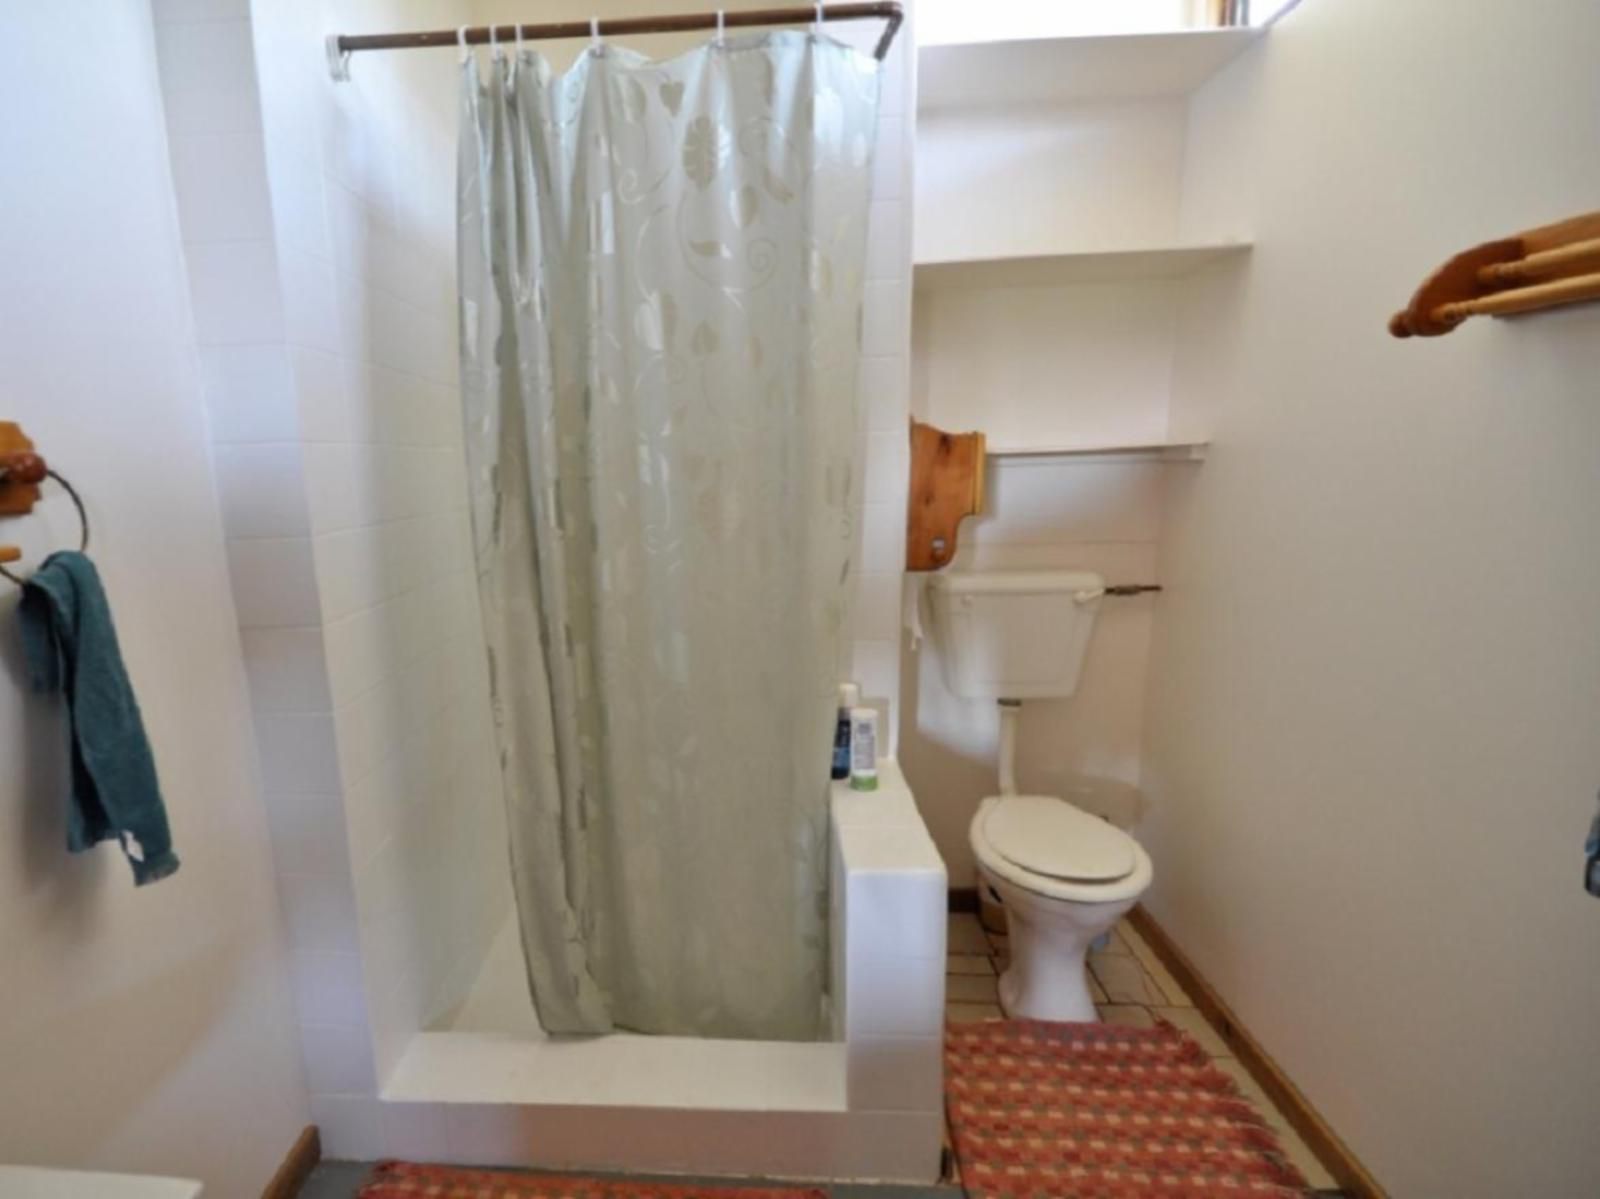 North Lodge Cottages Self Catering Park Hill Durban Kwazulu Natal South Africa Bathroom